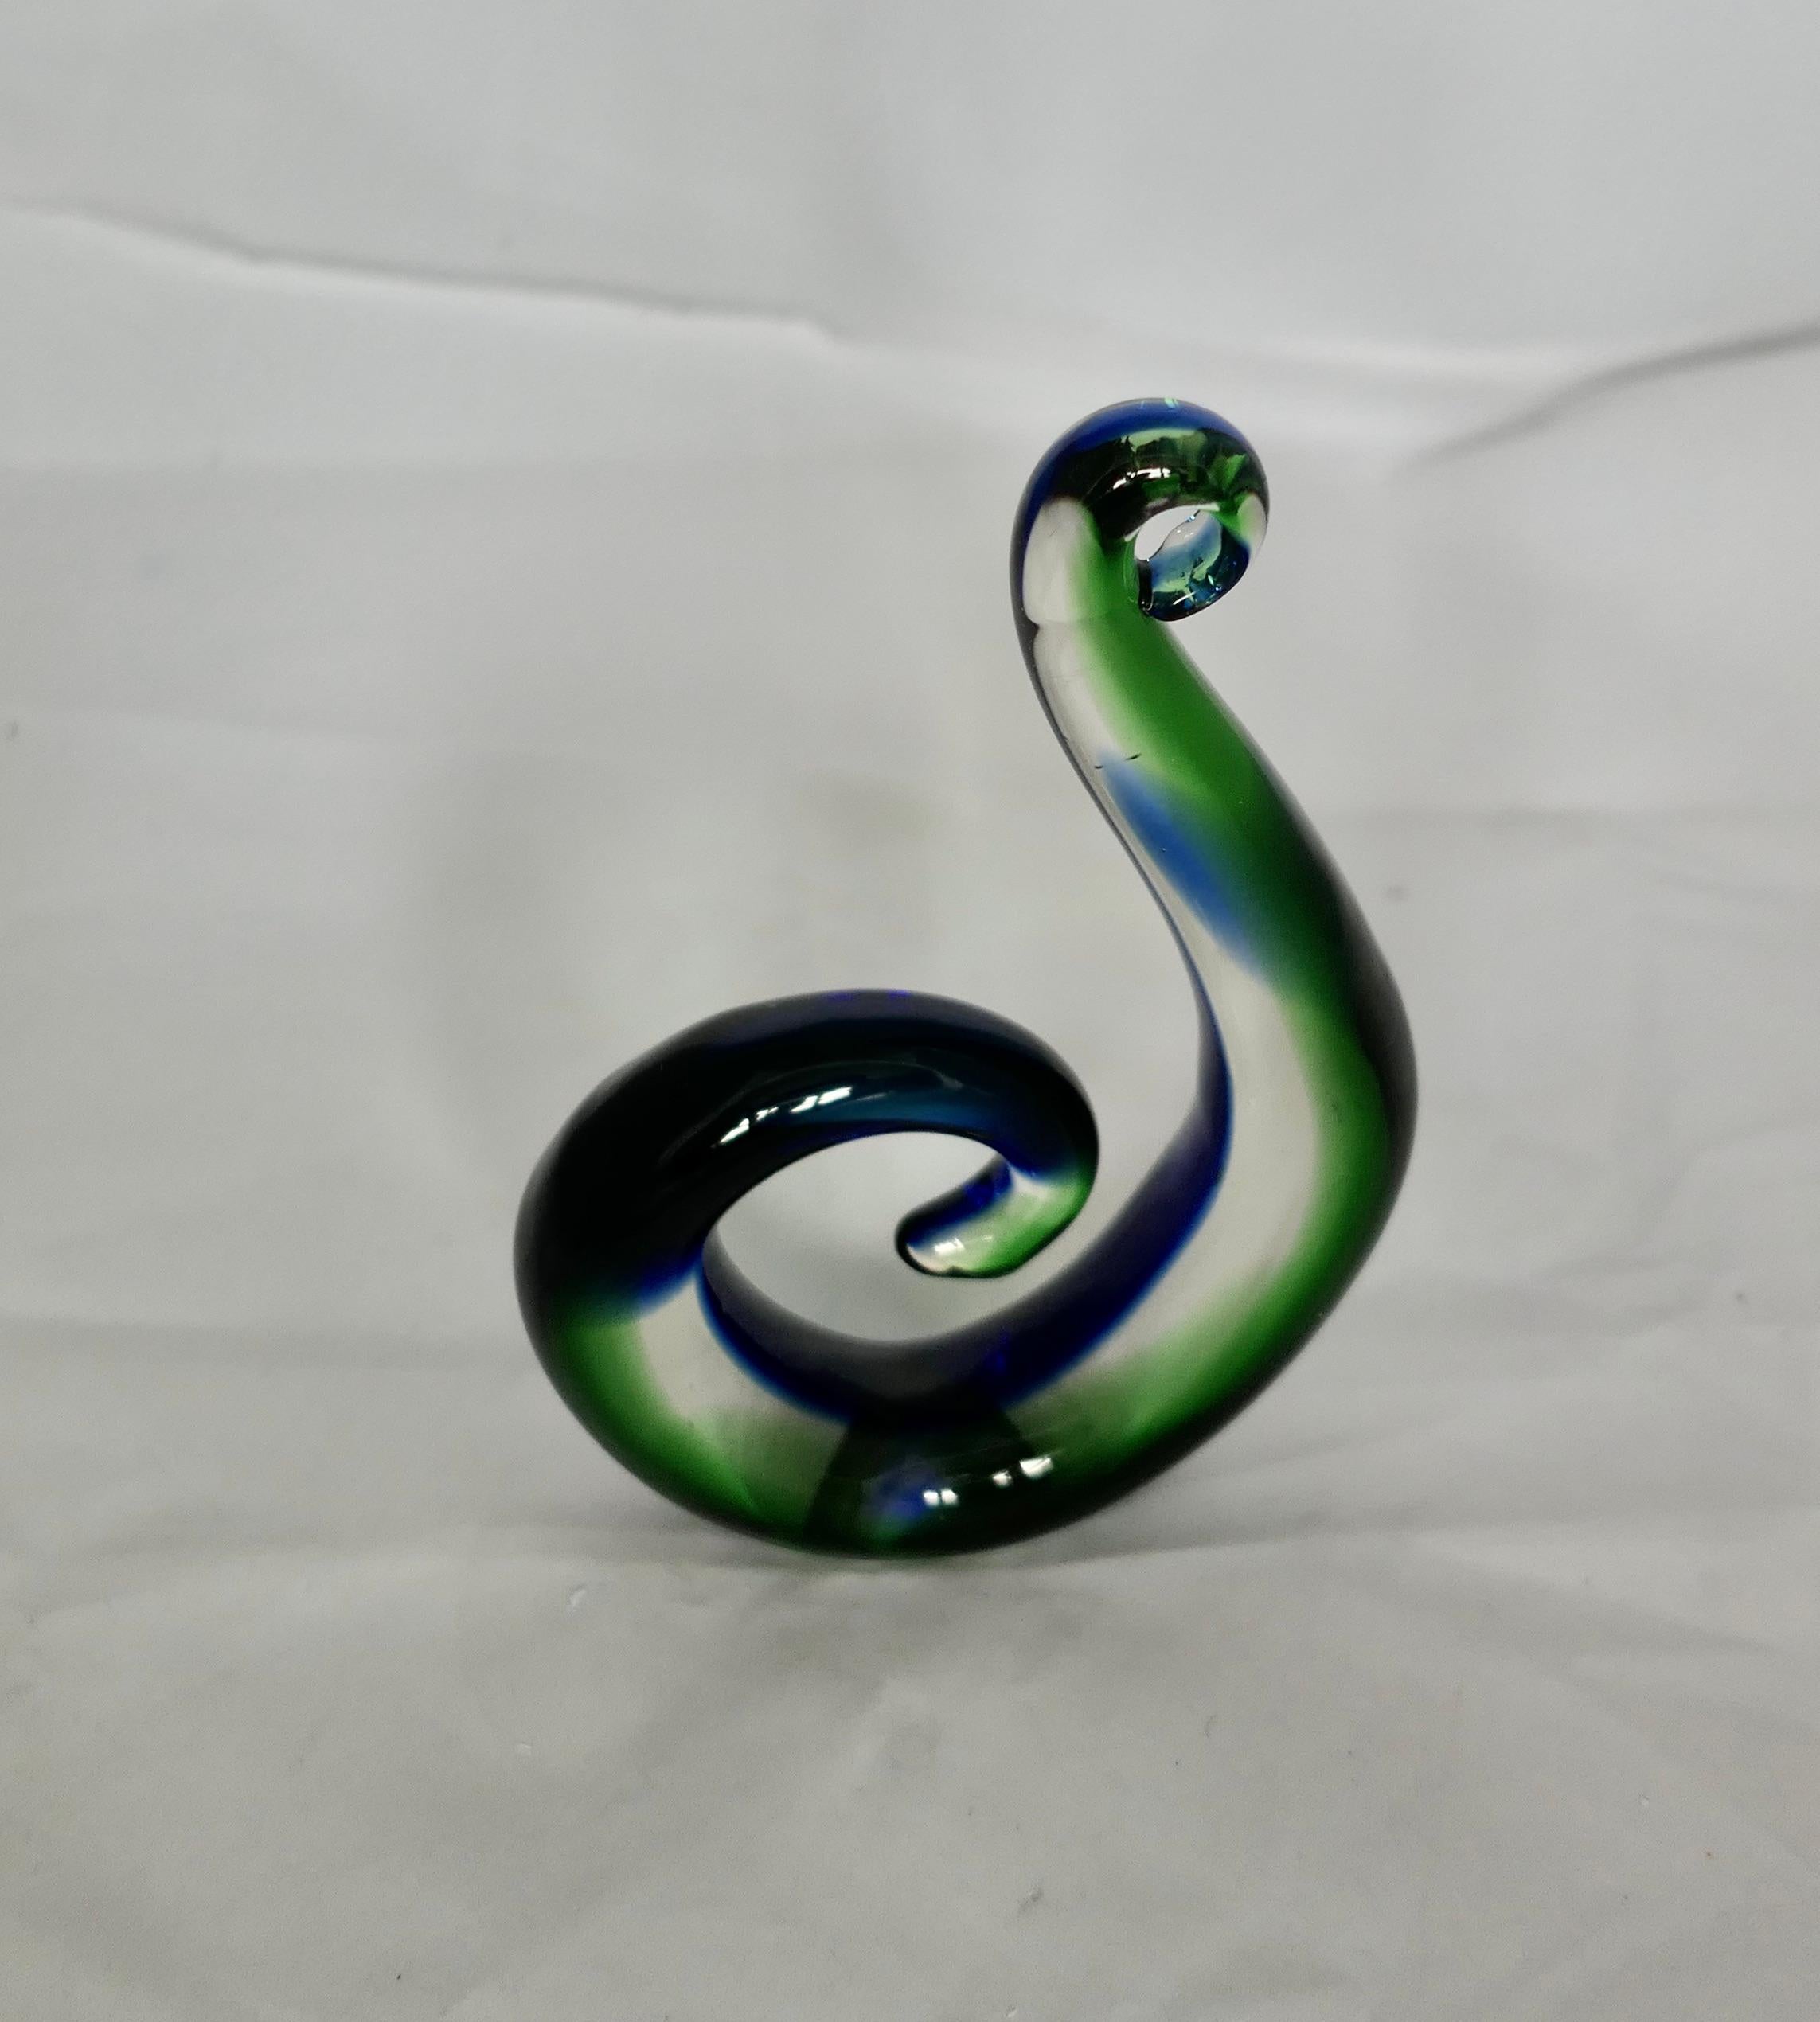 Folk Art Vintage Murano Hand Crafted Green and Blue Koru  Representing a Fern Frond   For Sale